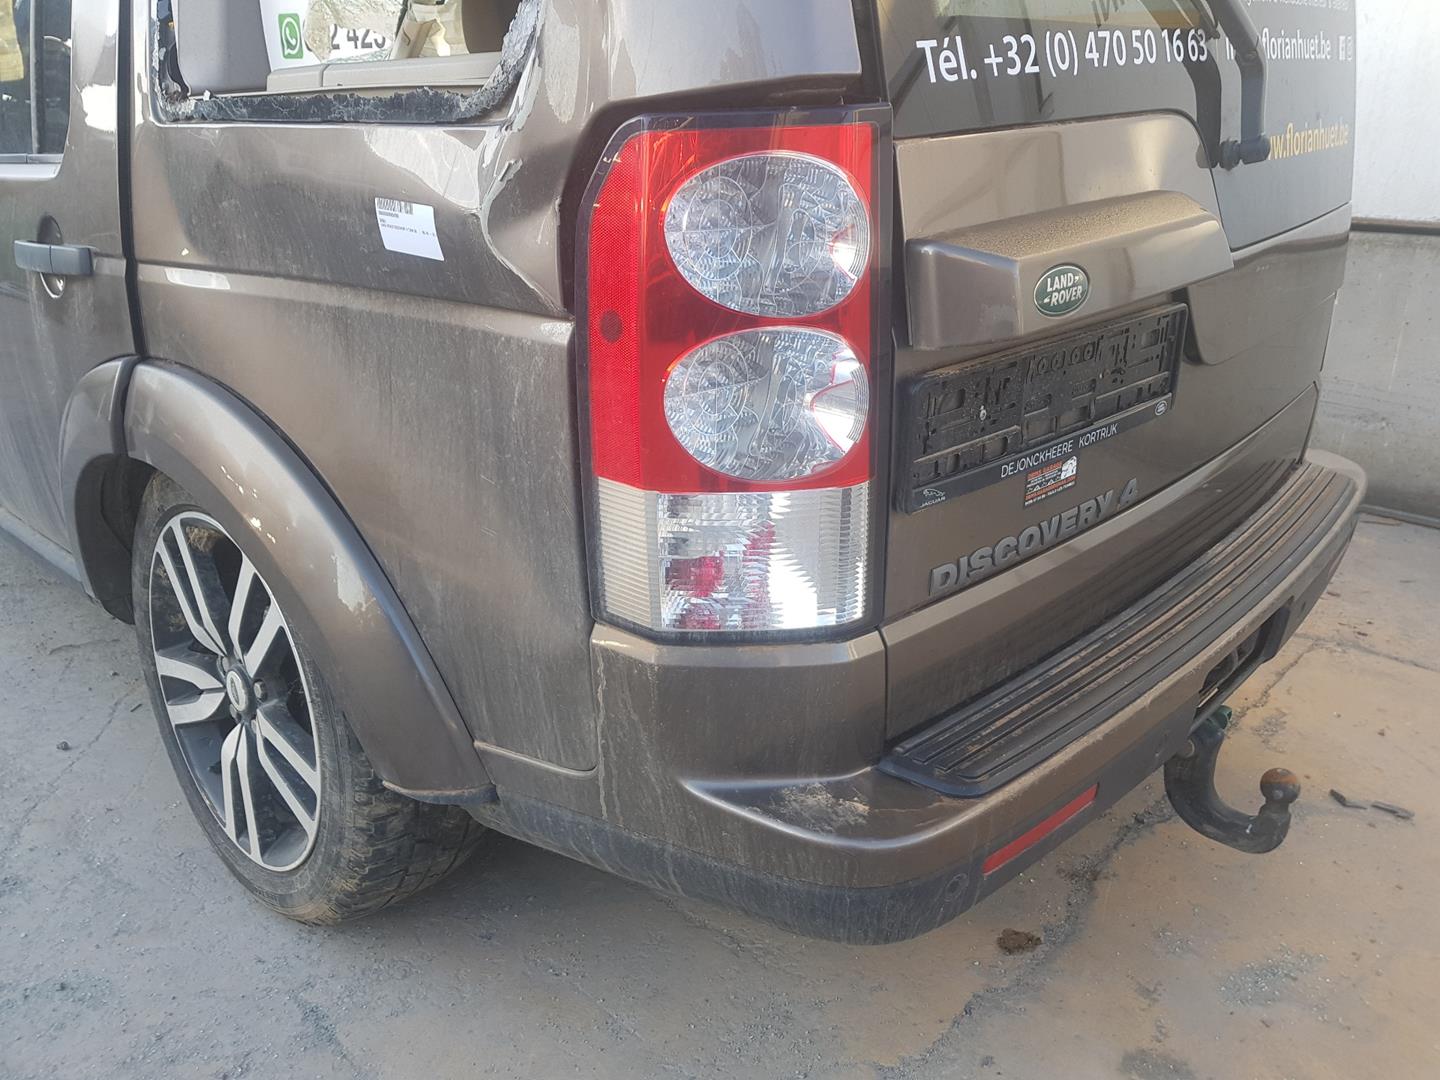 LAND ROVER Discovery 4 generation (2009-2016) Galinis dangtis LR045550, 5H2240709BB, COLORBRONCE 24130995